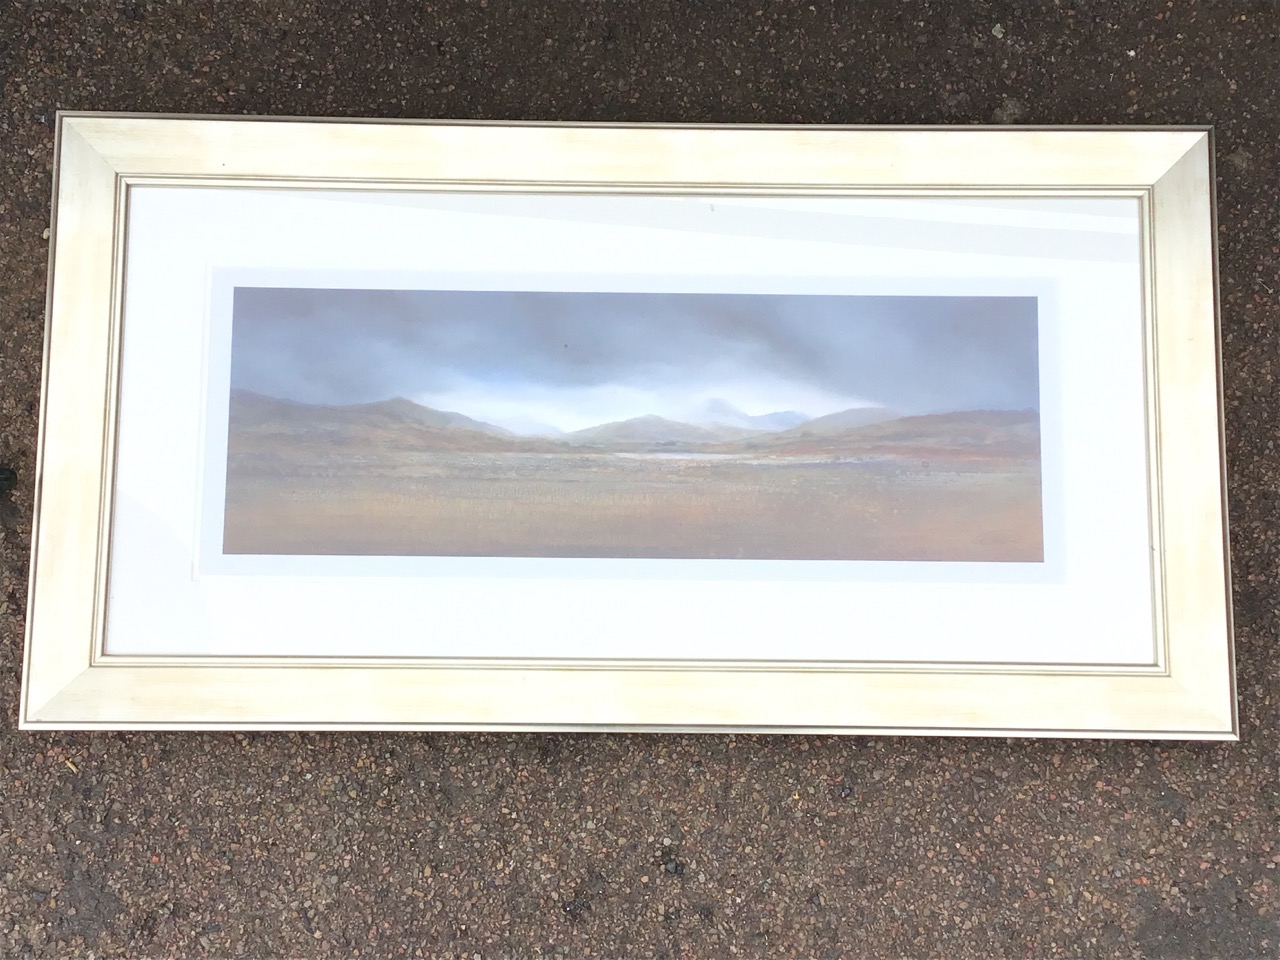 Peter Dowr, a signed lithographic highland landscape print, titled Distant Horizons 2, in silvered